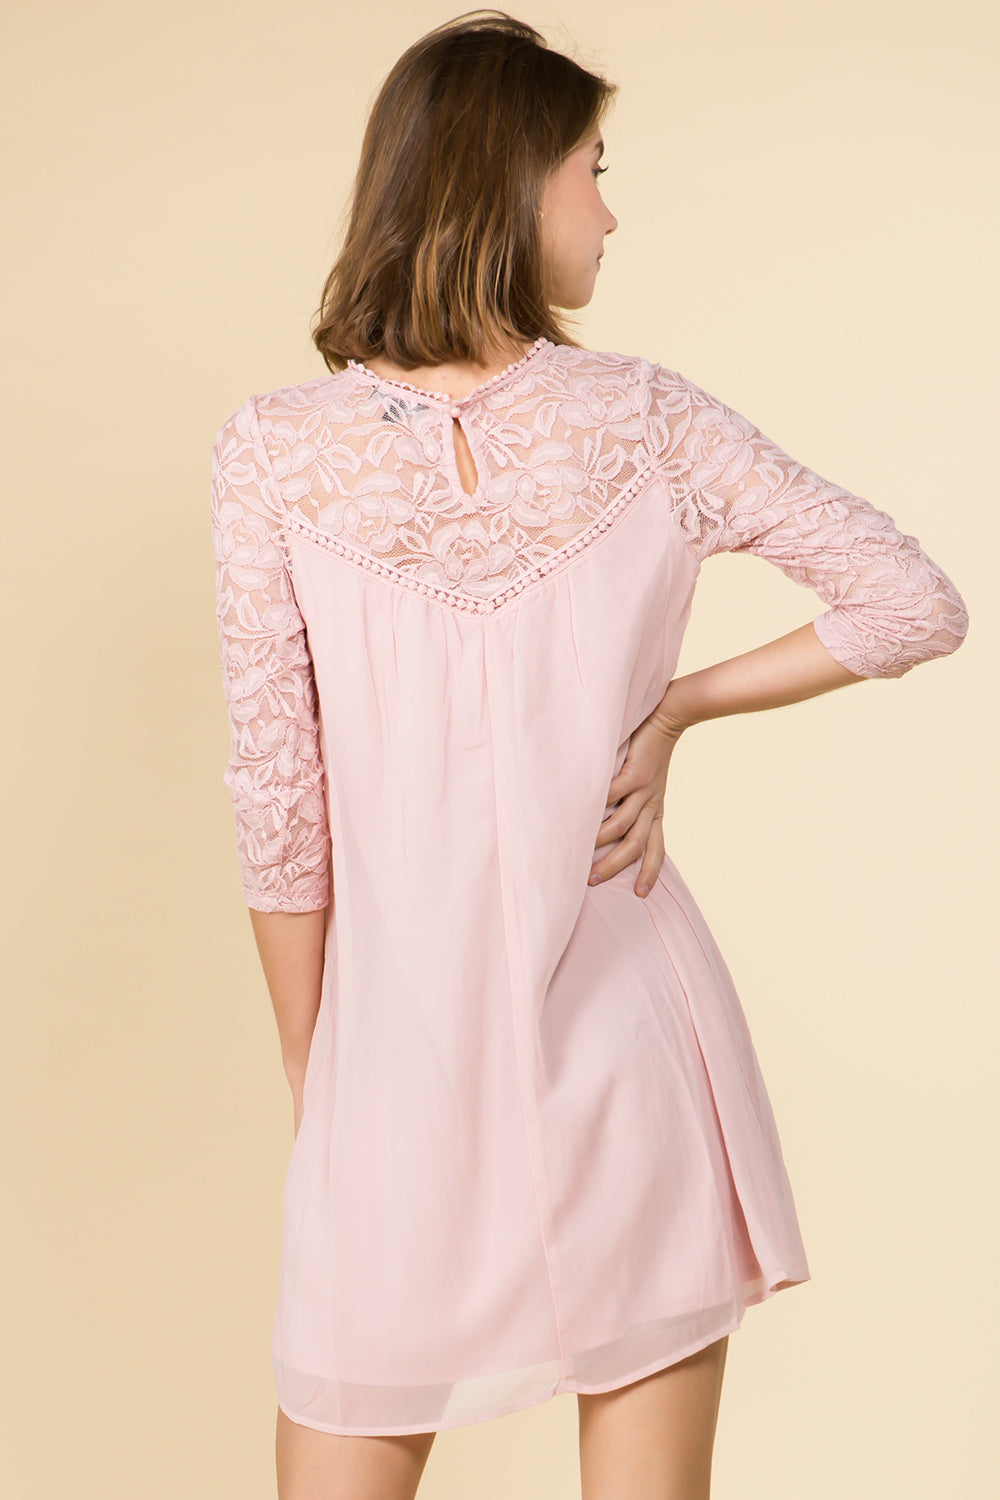 PINK BABYDOLL DRESS WITH LACE TRIM